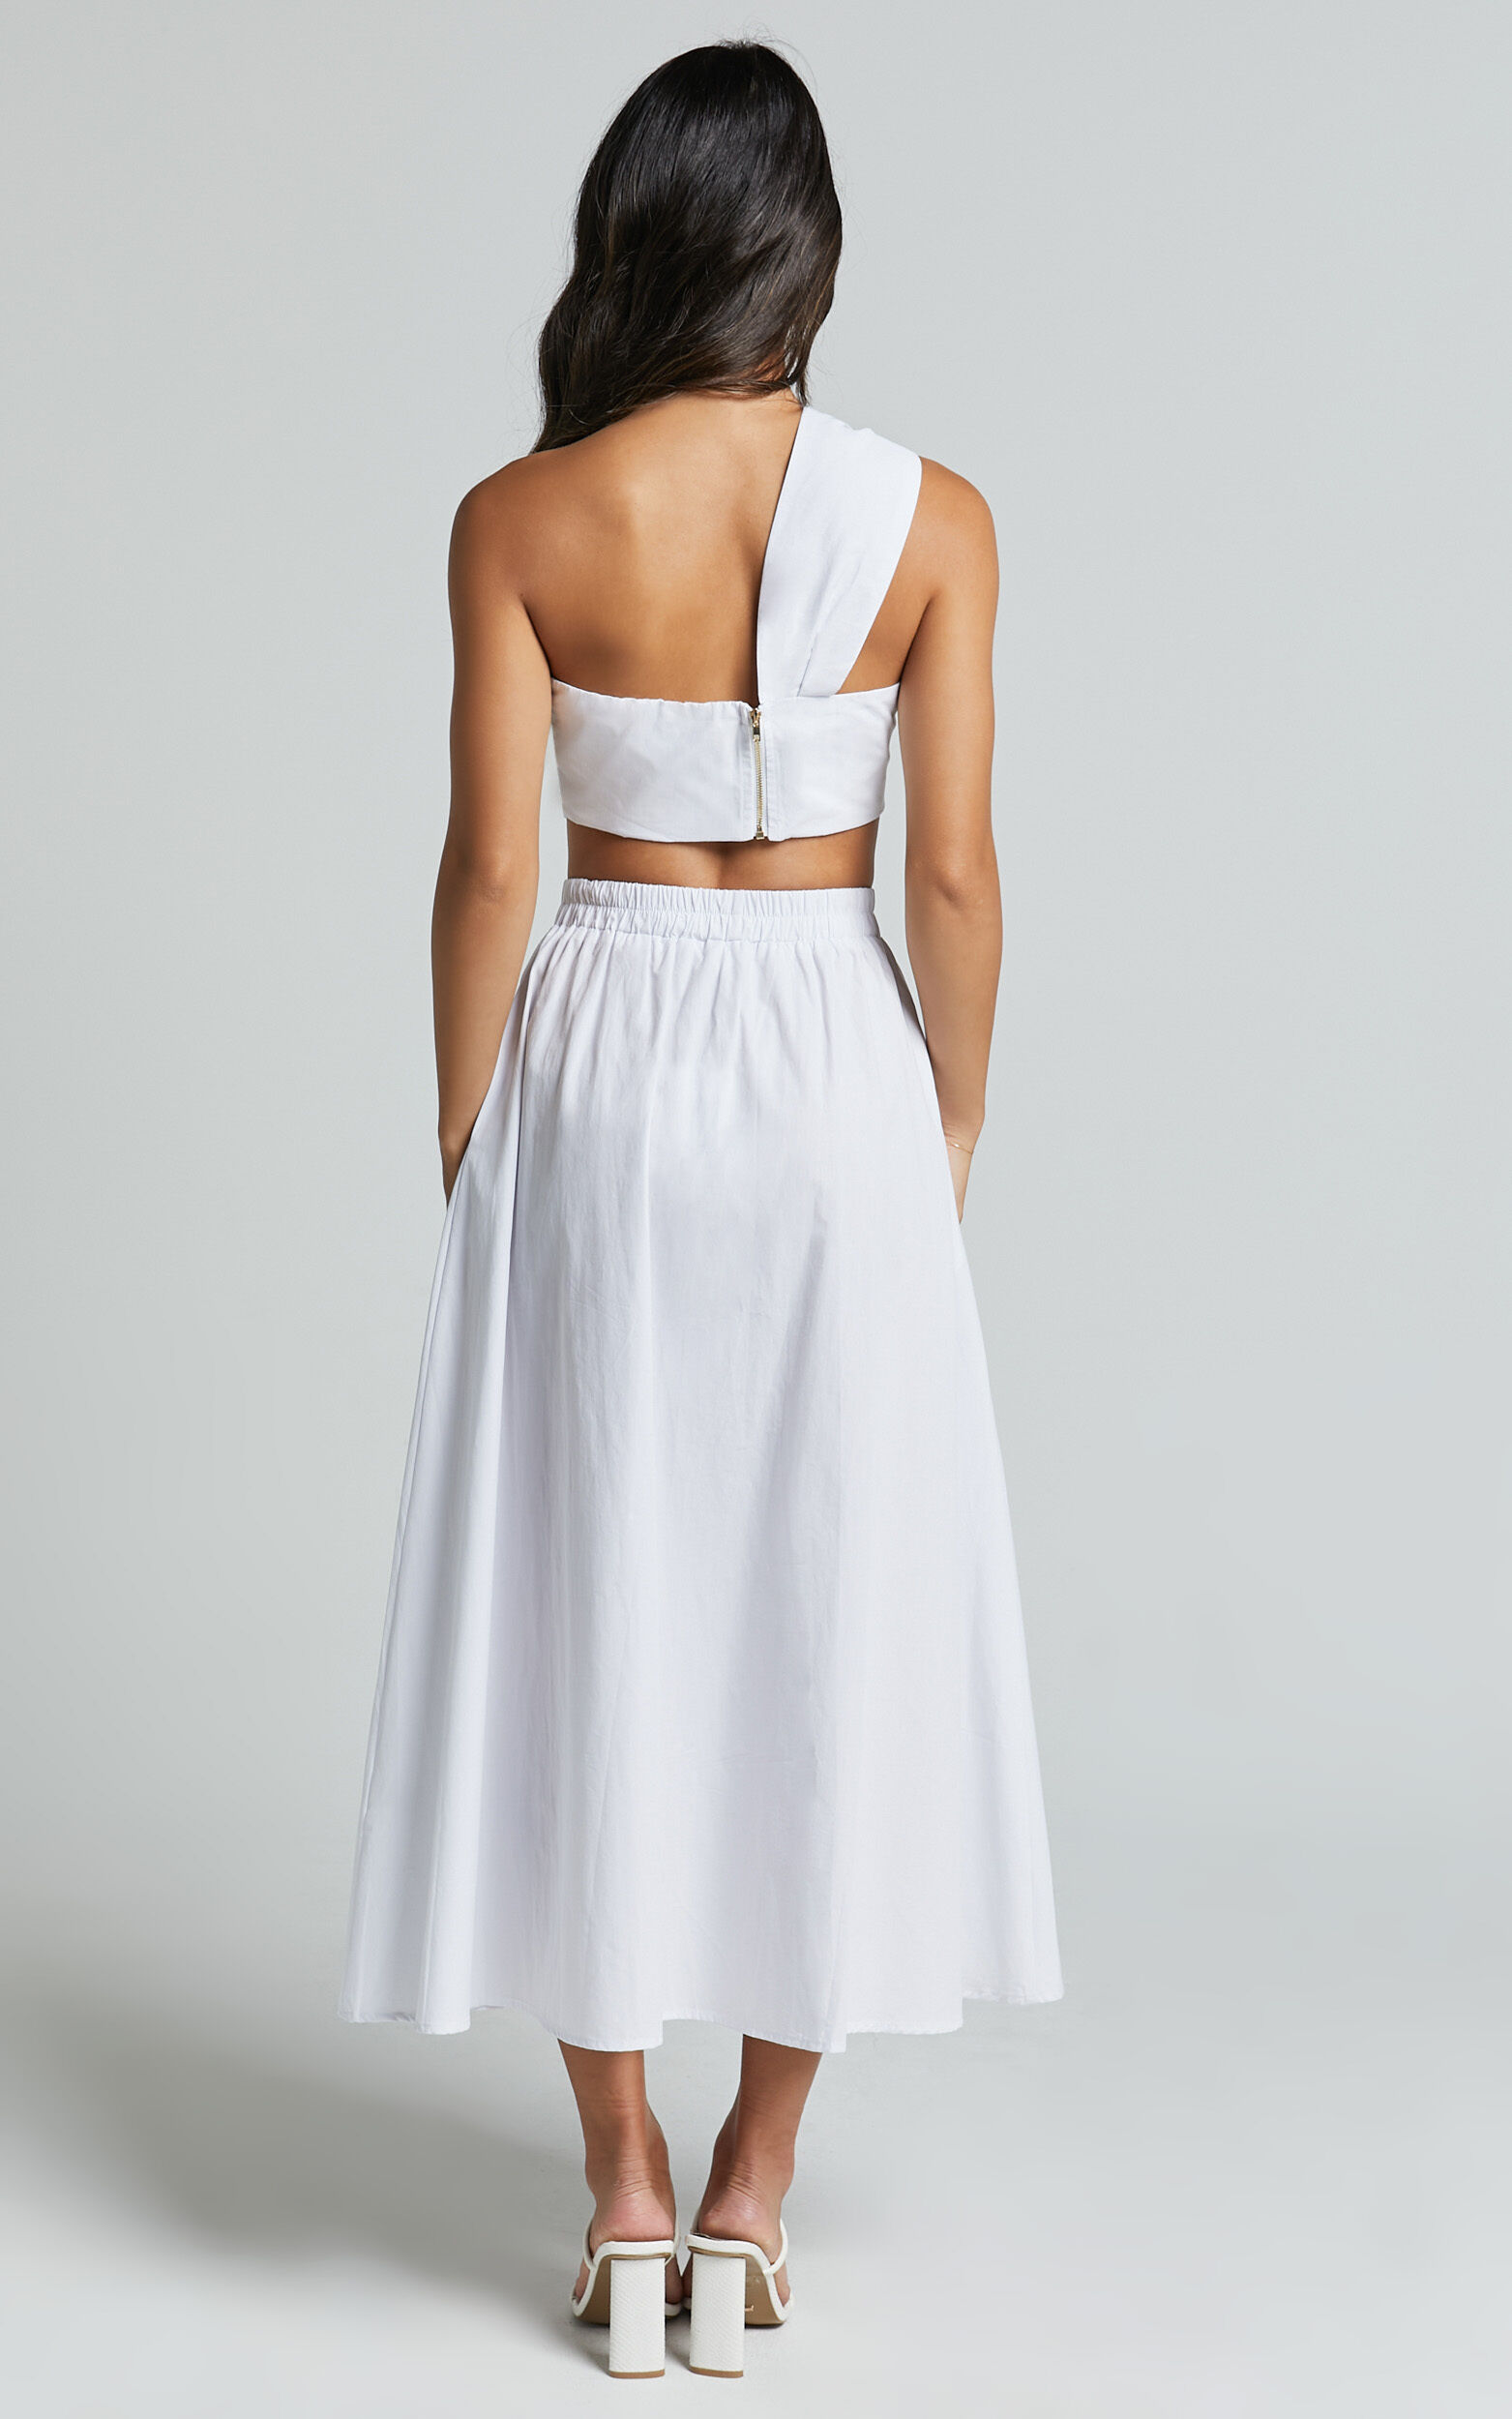 Sula Two Piece Set - One Shoulder Bralette Crop Top and Midi Skirt